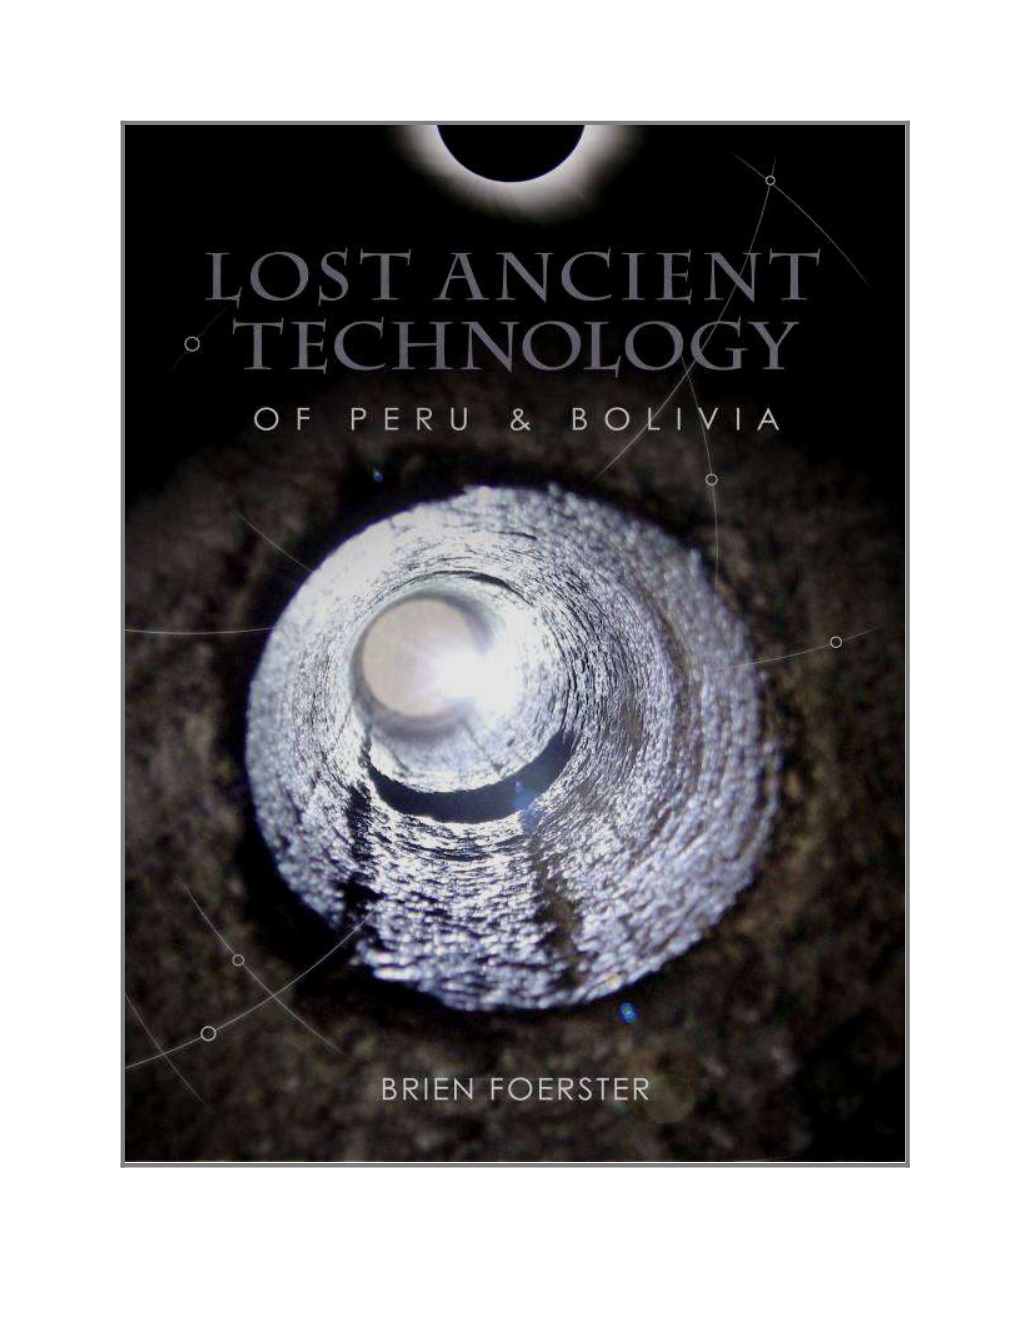 Lost Ancient Technology of Peru and Bolivia by Brien Foerster